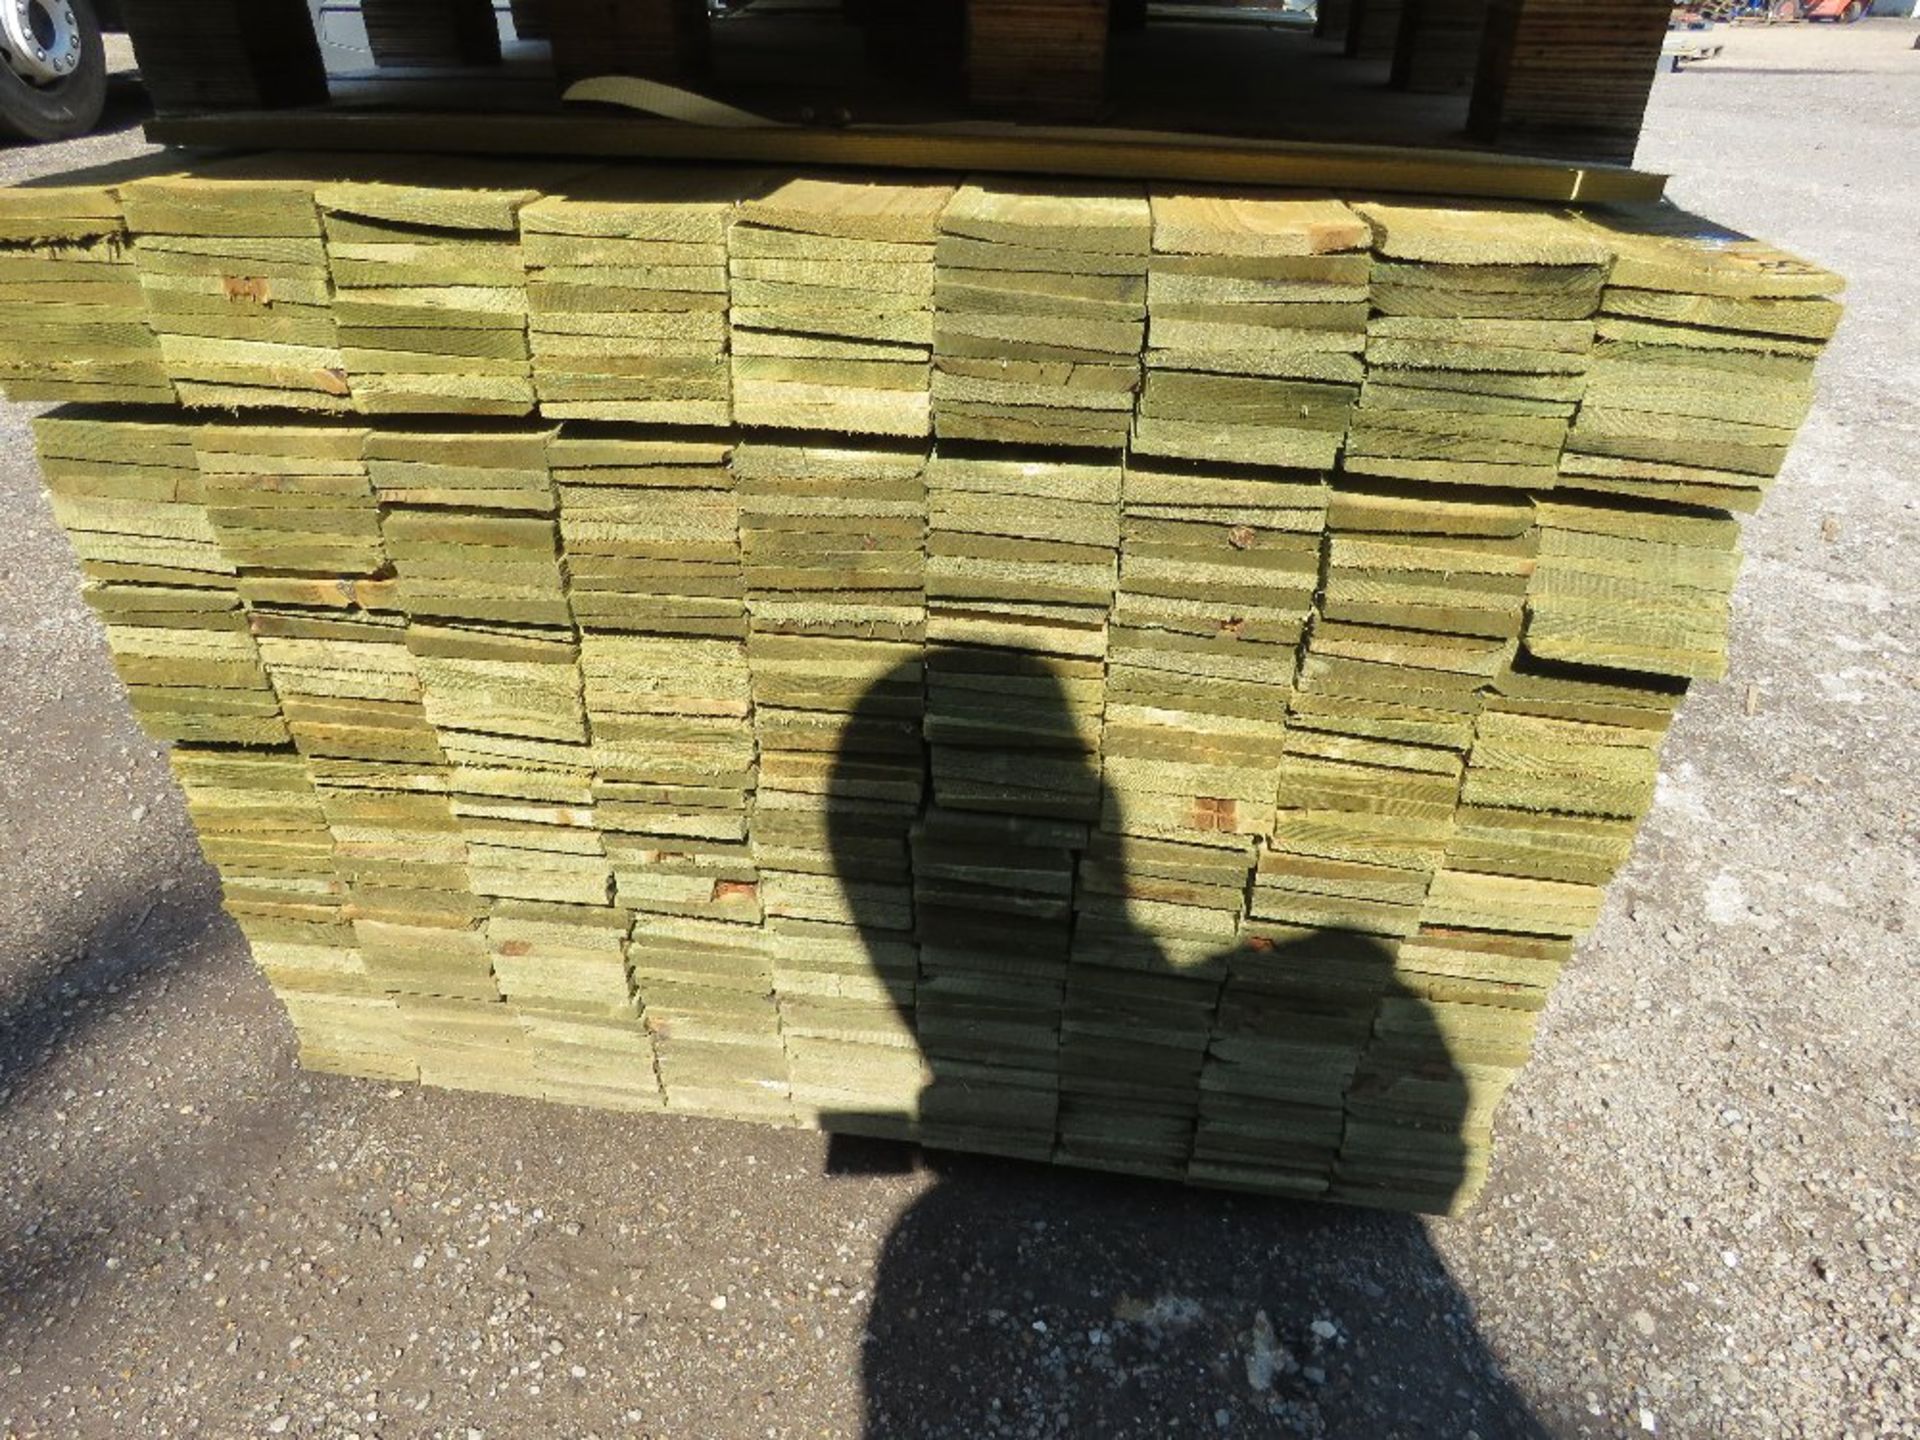 LARGE PACK OF PRESSURE TREATED FEATHER EDGE CLADDING TIMBER BOARDS 1.8M LENGTH X 100MM WIDTH APPROX. - Image 2 of 3